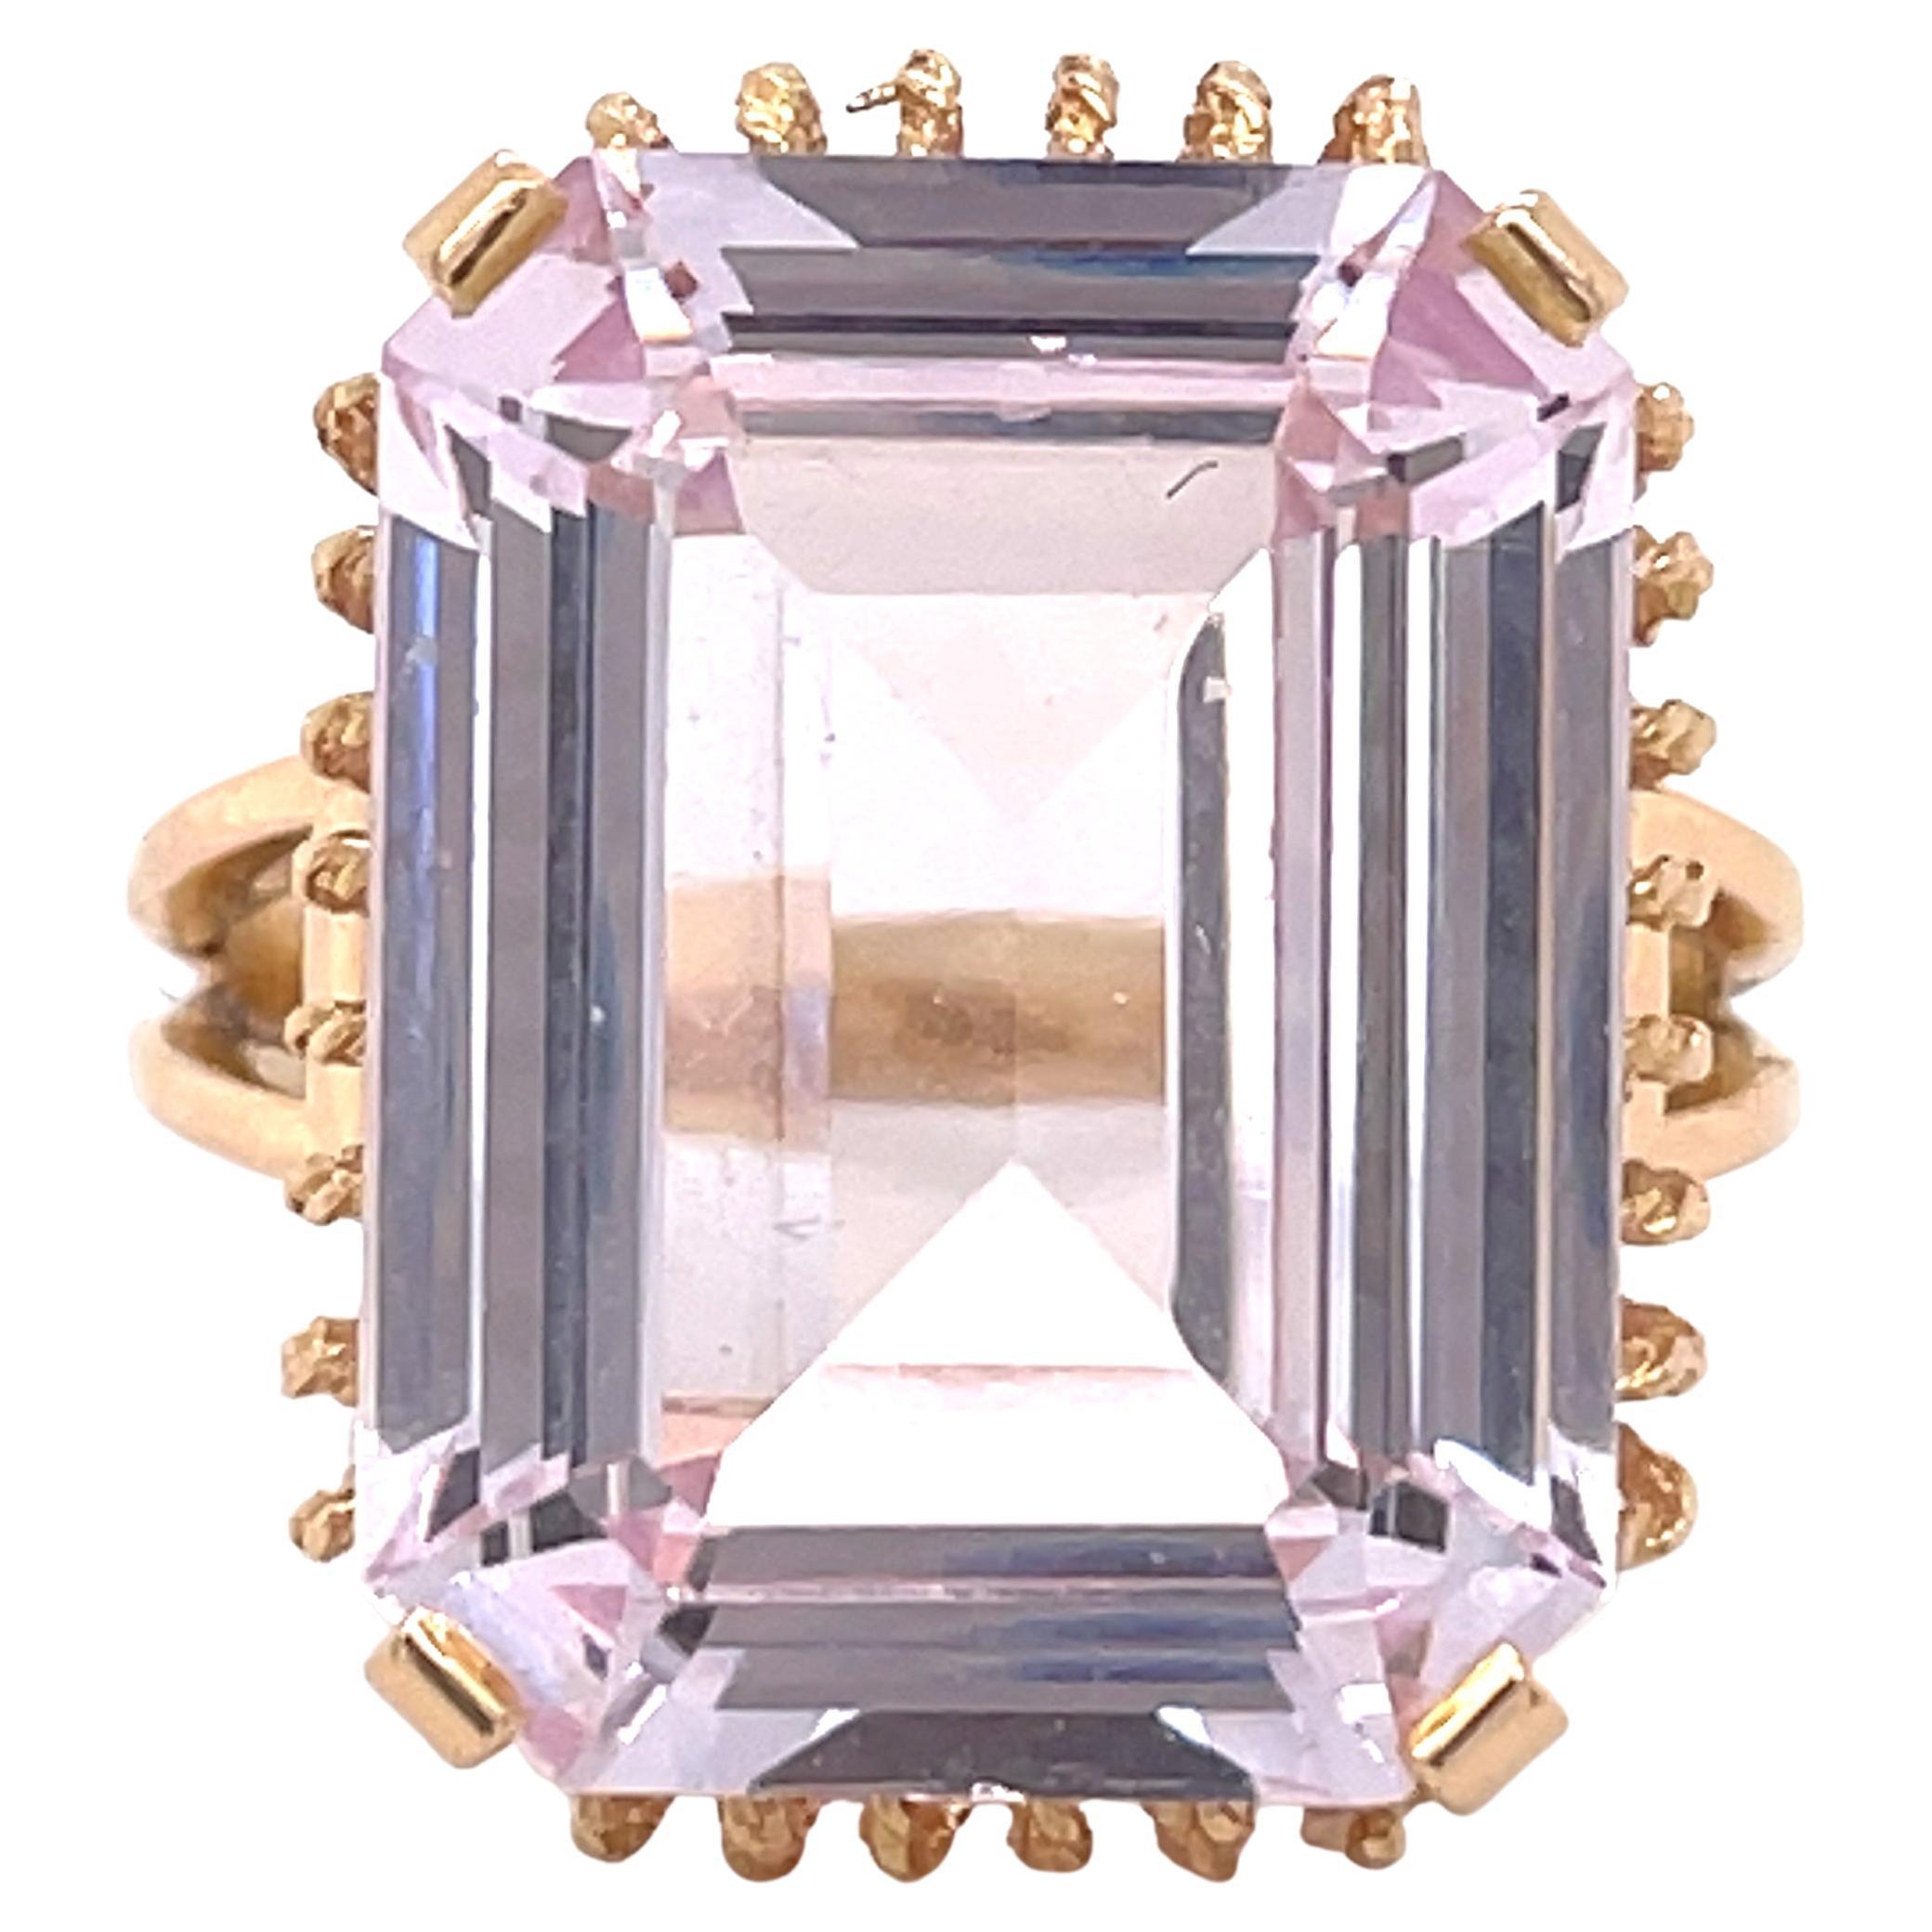 Retro Estate Ring - 16.23CT Emerald Shape Pink Spinel, Solid 14k Rose Gold, Estate Ring, Pink Spinel Cocktail ring, Statment Gemstone Ring  Estate Jewelry  Hand Made
~~ S e t t i n g ~~
total weight: 7.64 grams
Ring Size 6.75 US

Metal 14K/585